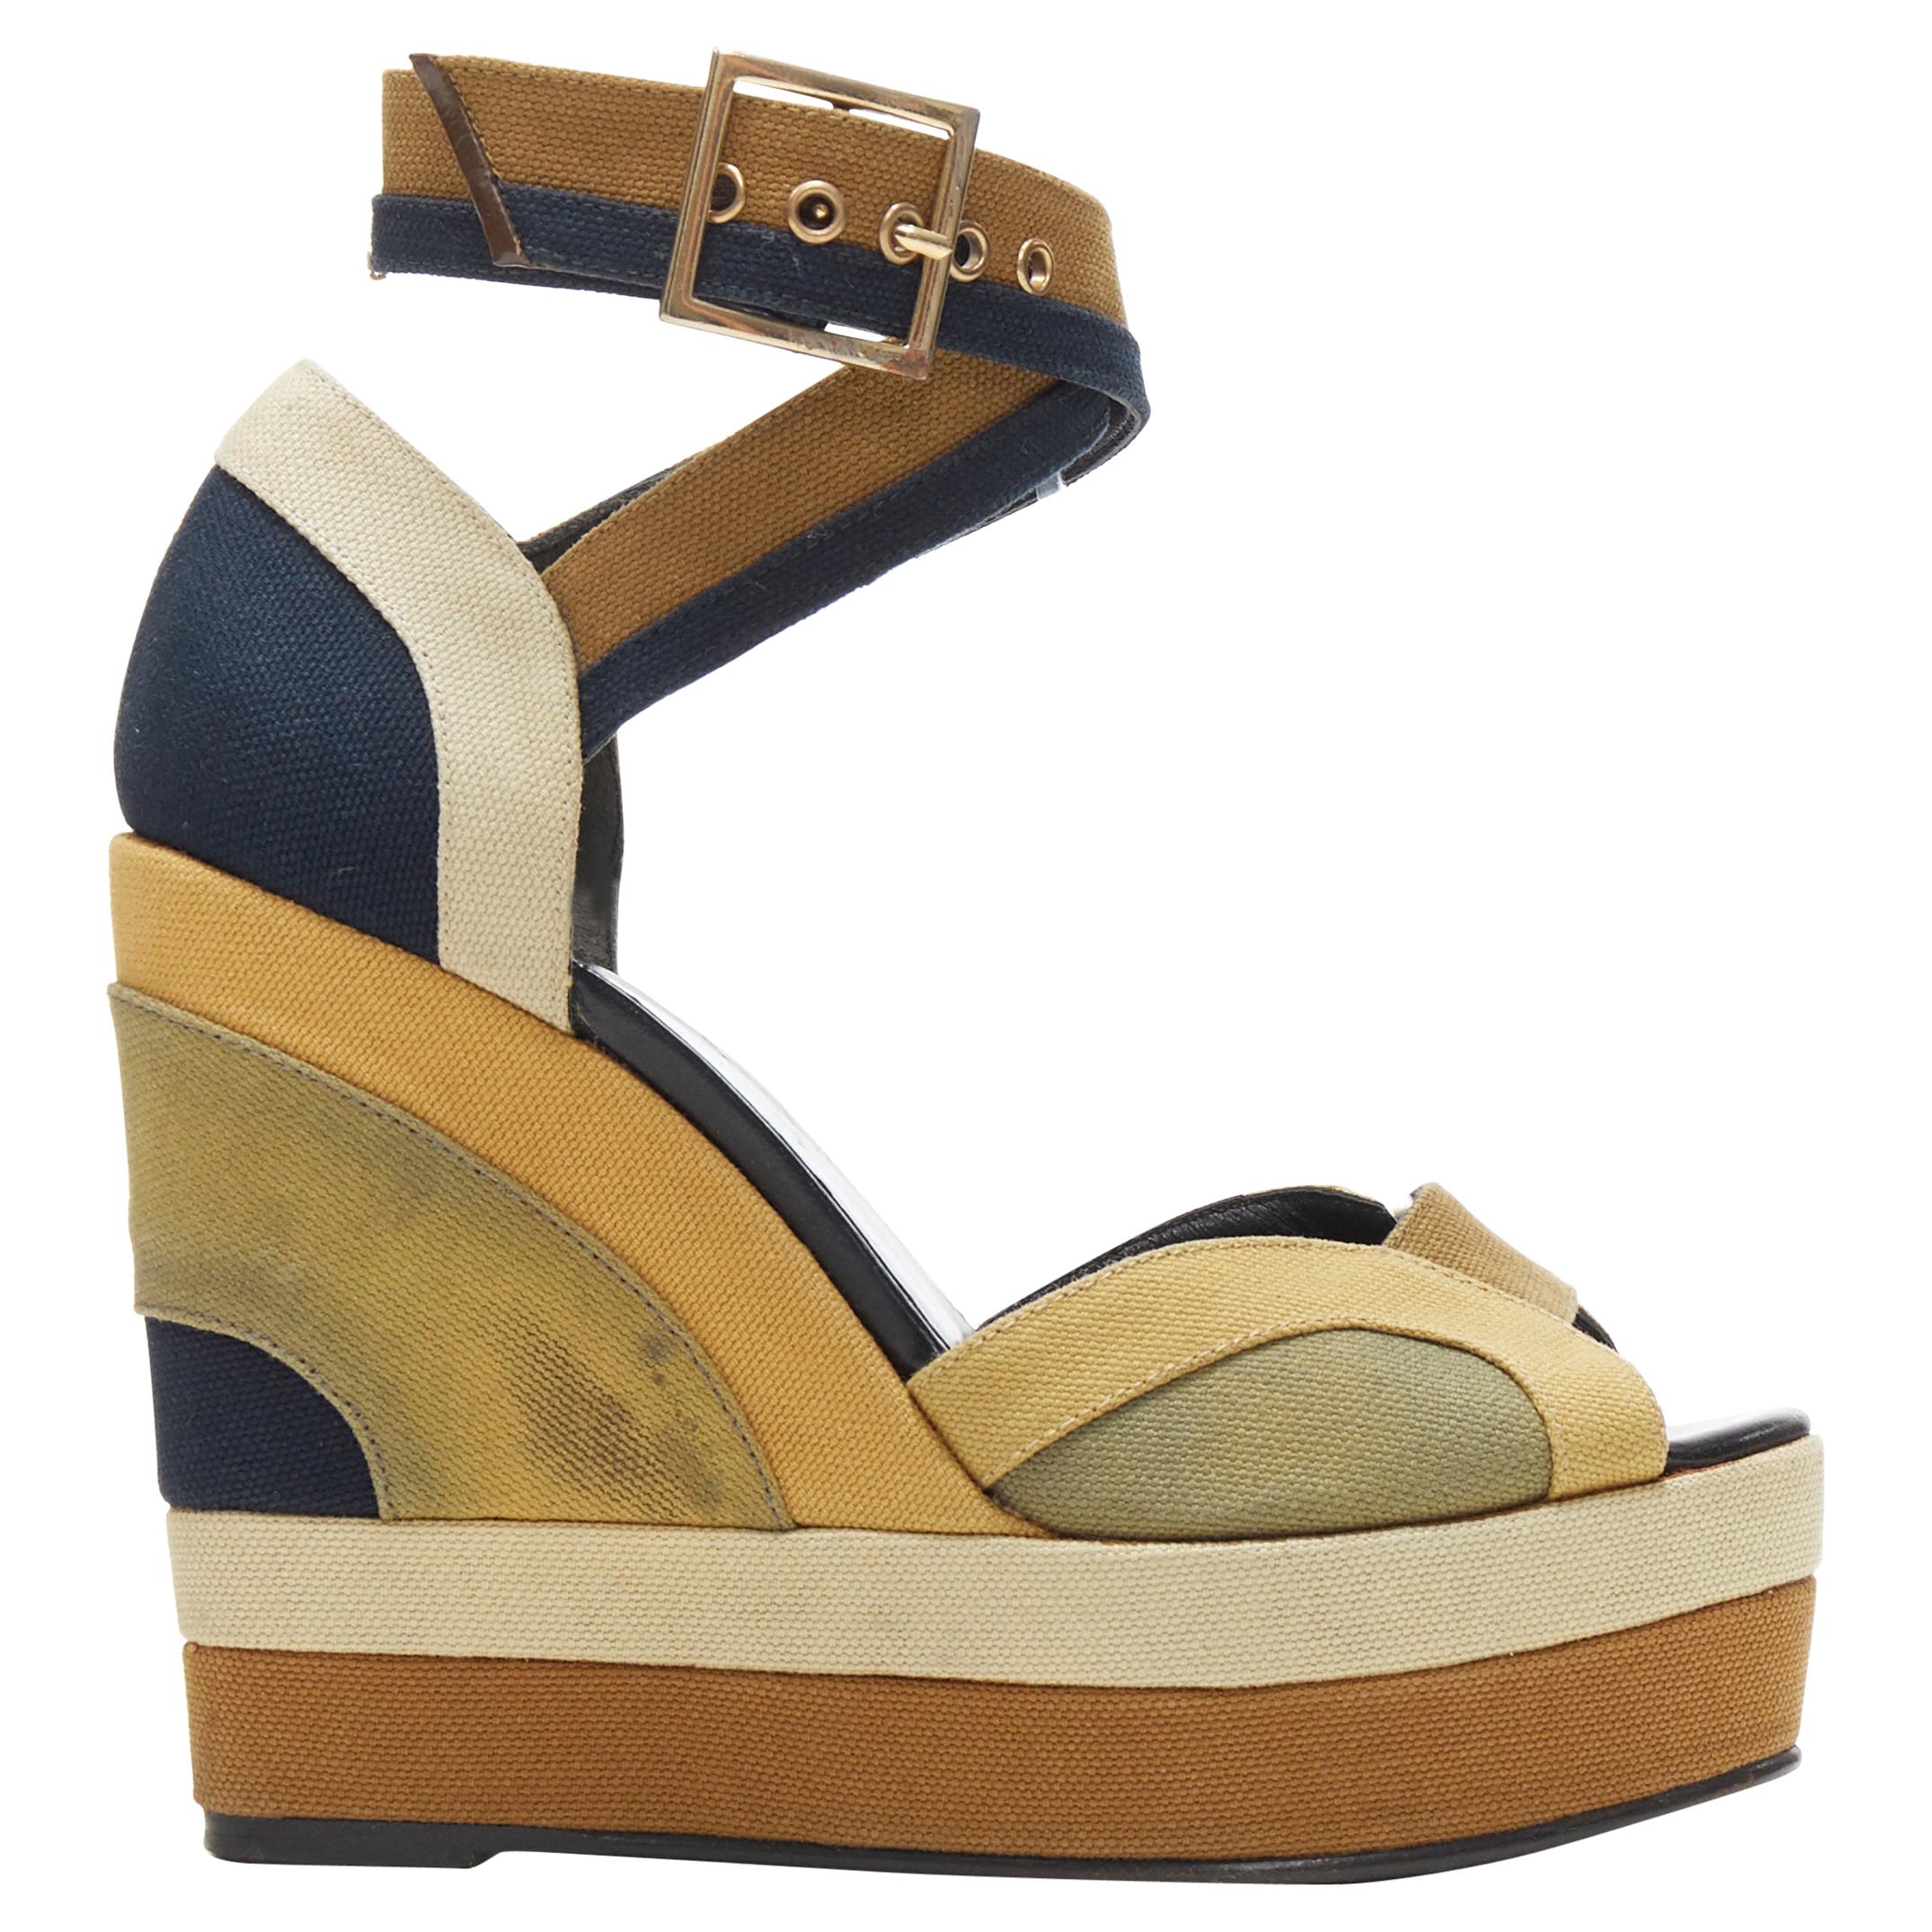 PIERRE HARDY beige tan blue canvas colorblocked open toe ankle wrap wedge EU36
Brand: Pierre Hardy
Designer: Pierre Hardy
Model Name / Style: Wedge
Material: Fabric
Color: Beige, navy
Pattern: Solid
Closure: Ankle strap
Extra Detail: Colorblocked